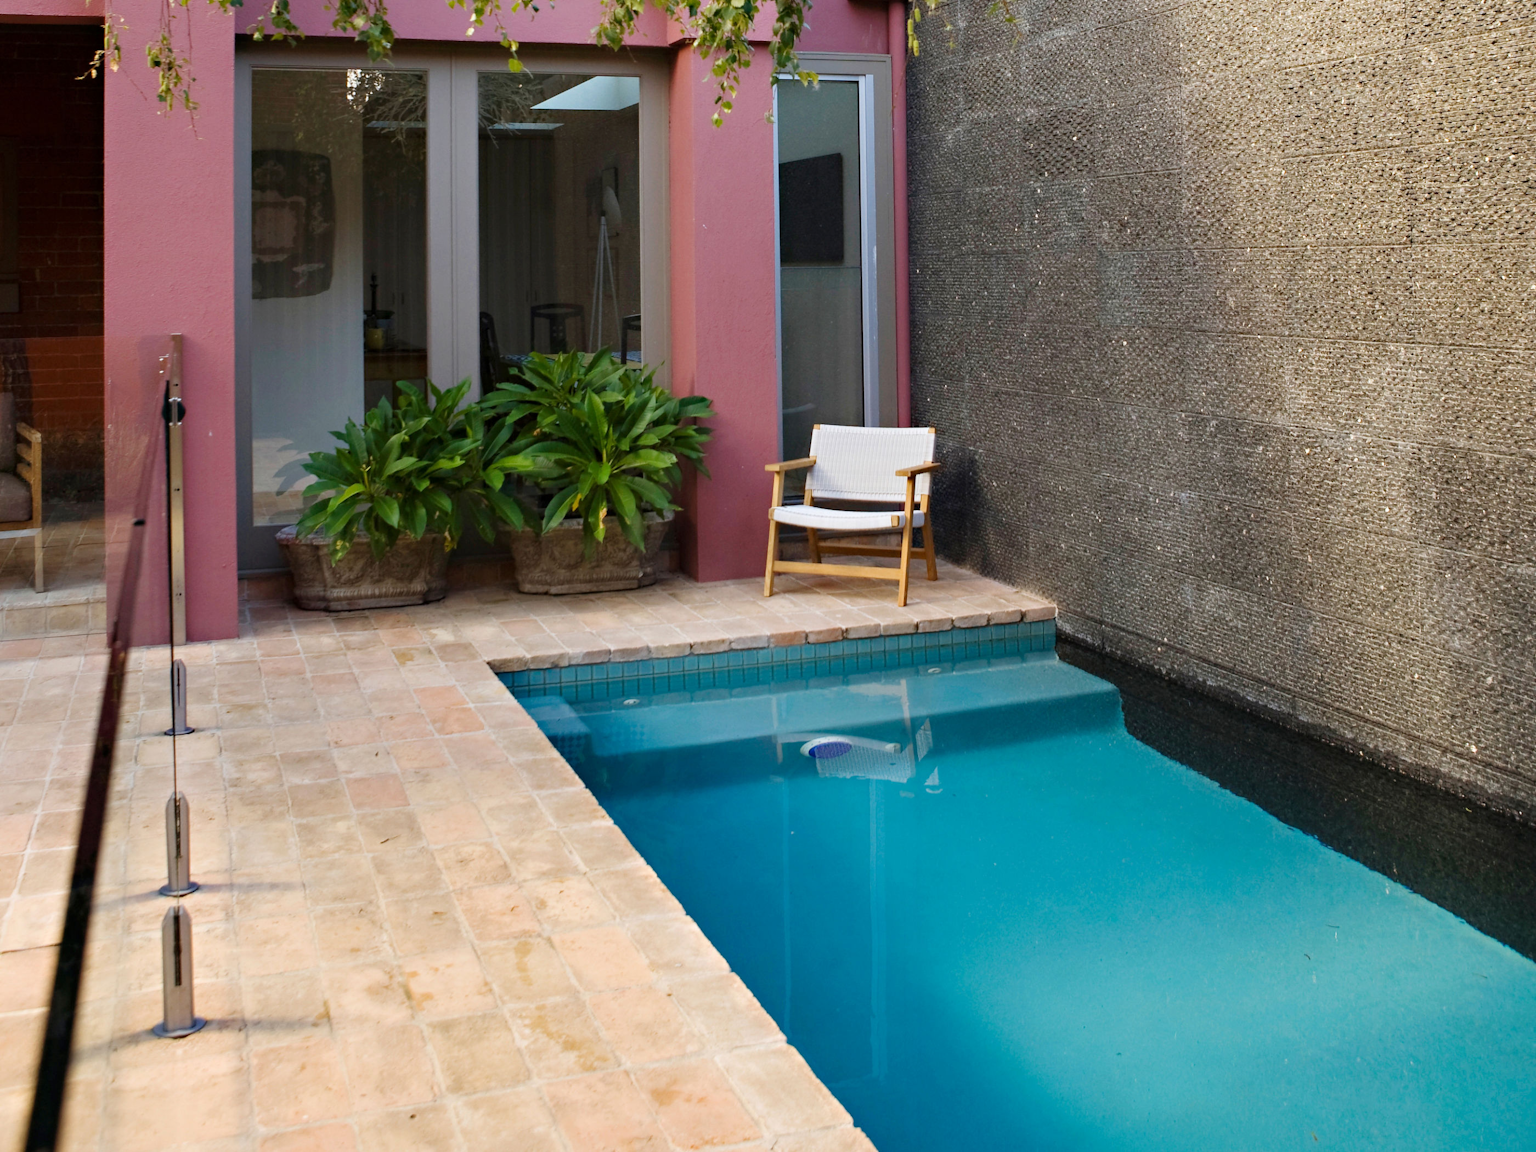 Antico Luce cotto coping units and rough sycled Raven granite walling in pool area